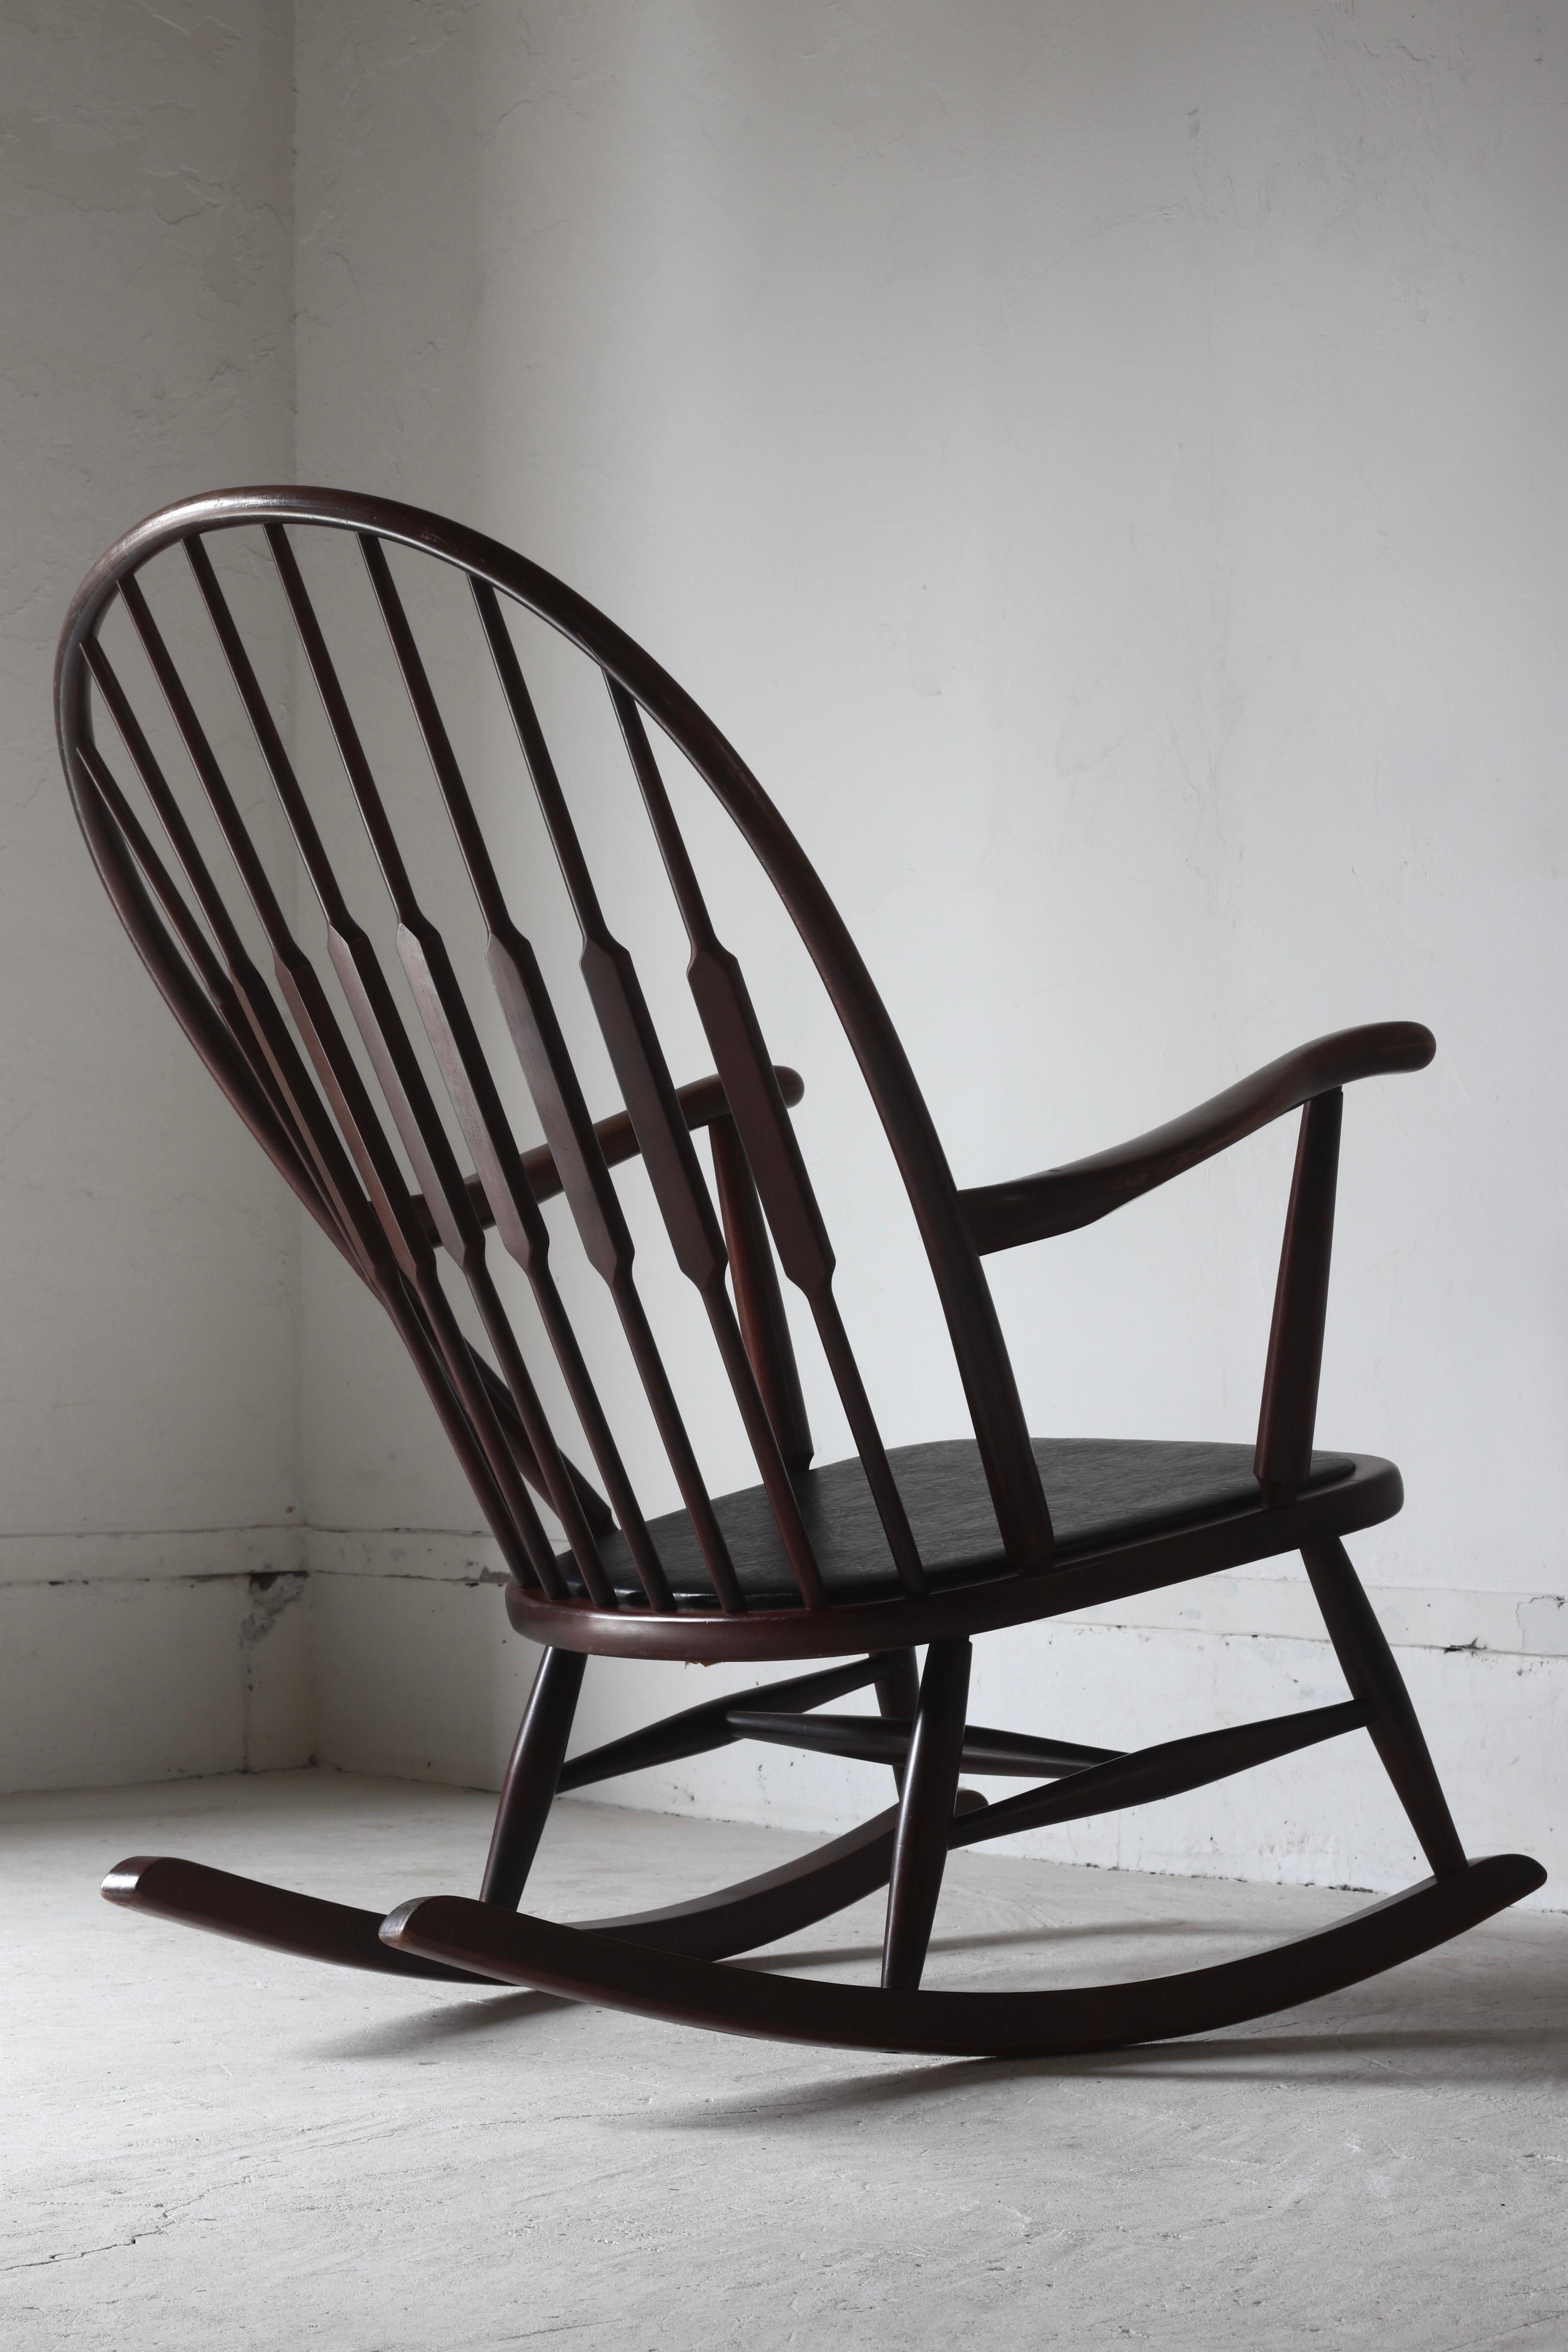 It is a vintage rocking chair made by Akita Woodworking Company, the only workshop specializing in curved wood furniture in Japan.

It is a rare item that is currently out of print and has not been manufactured.

It is a traditional Windsor style